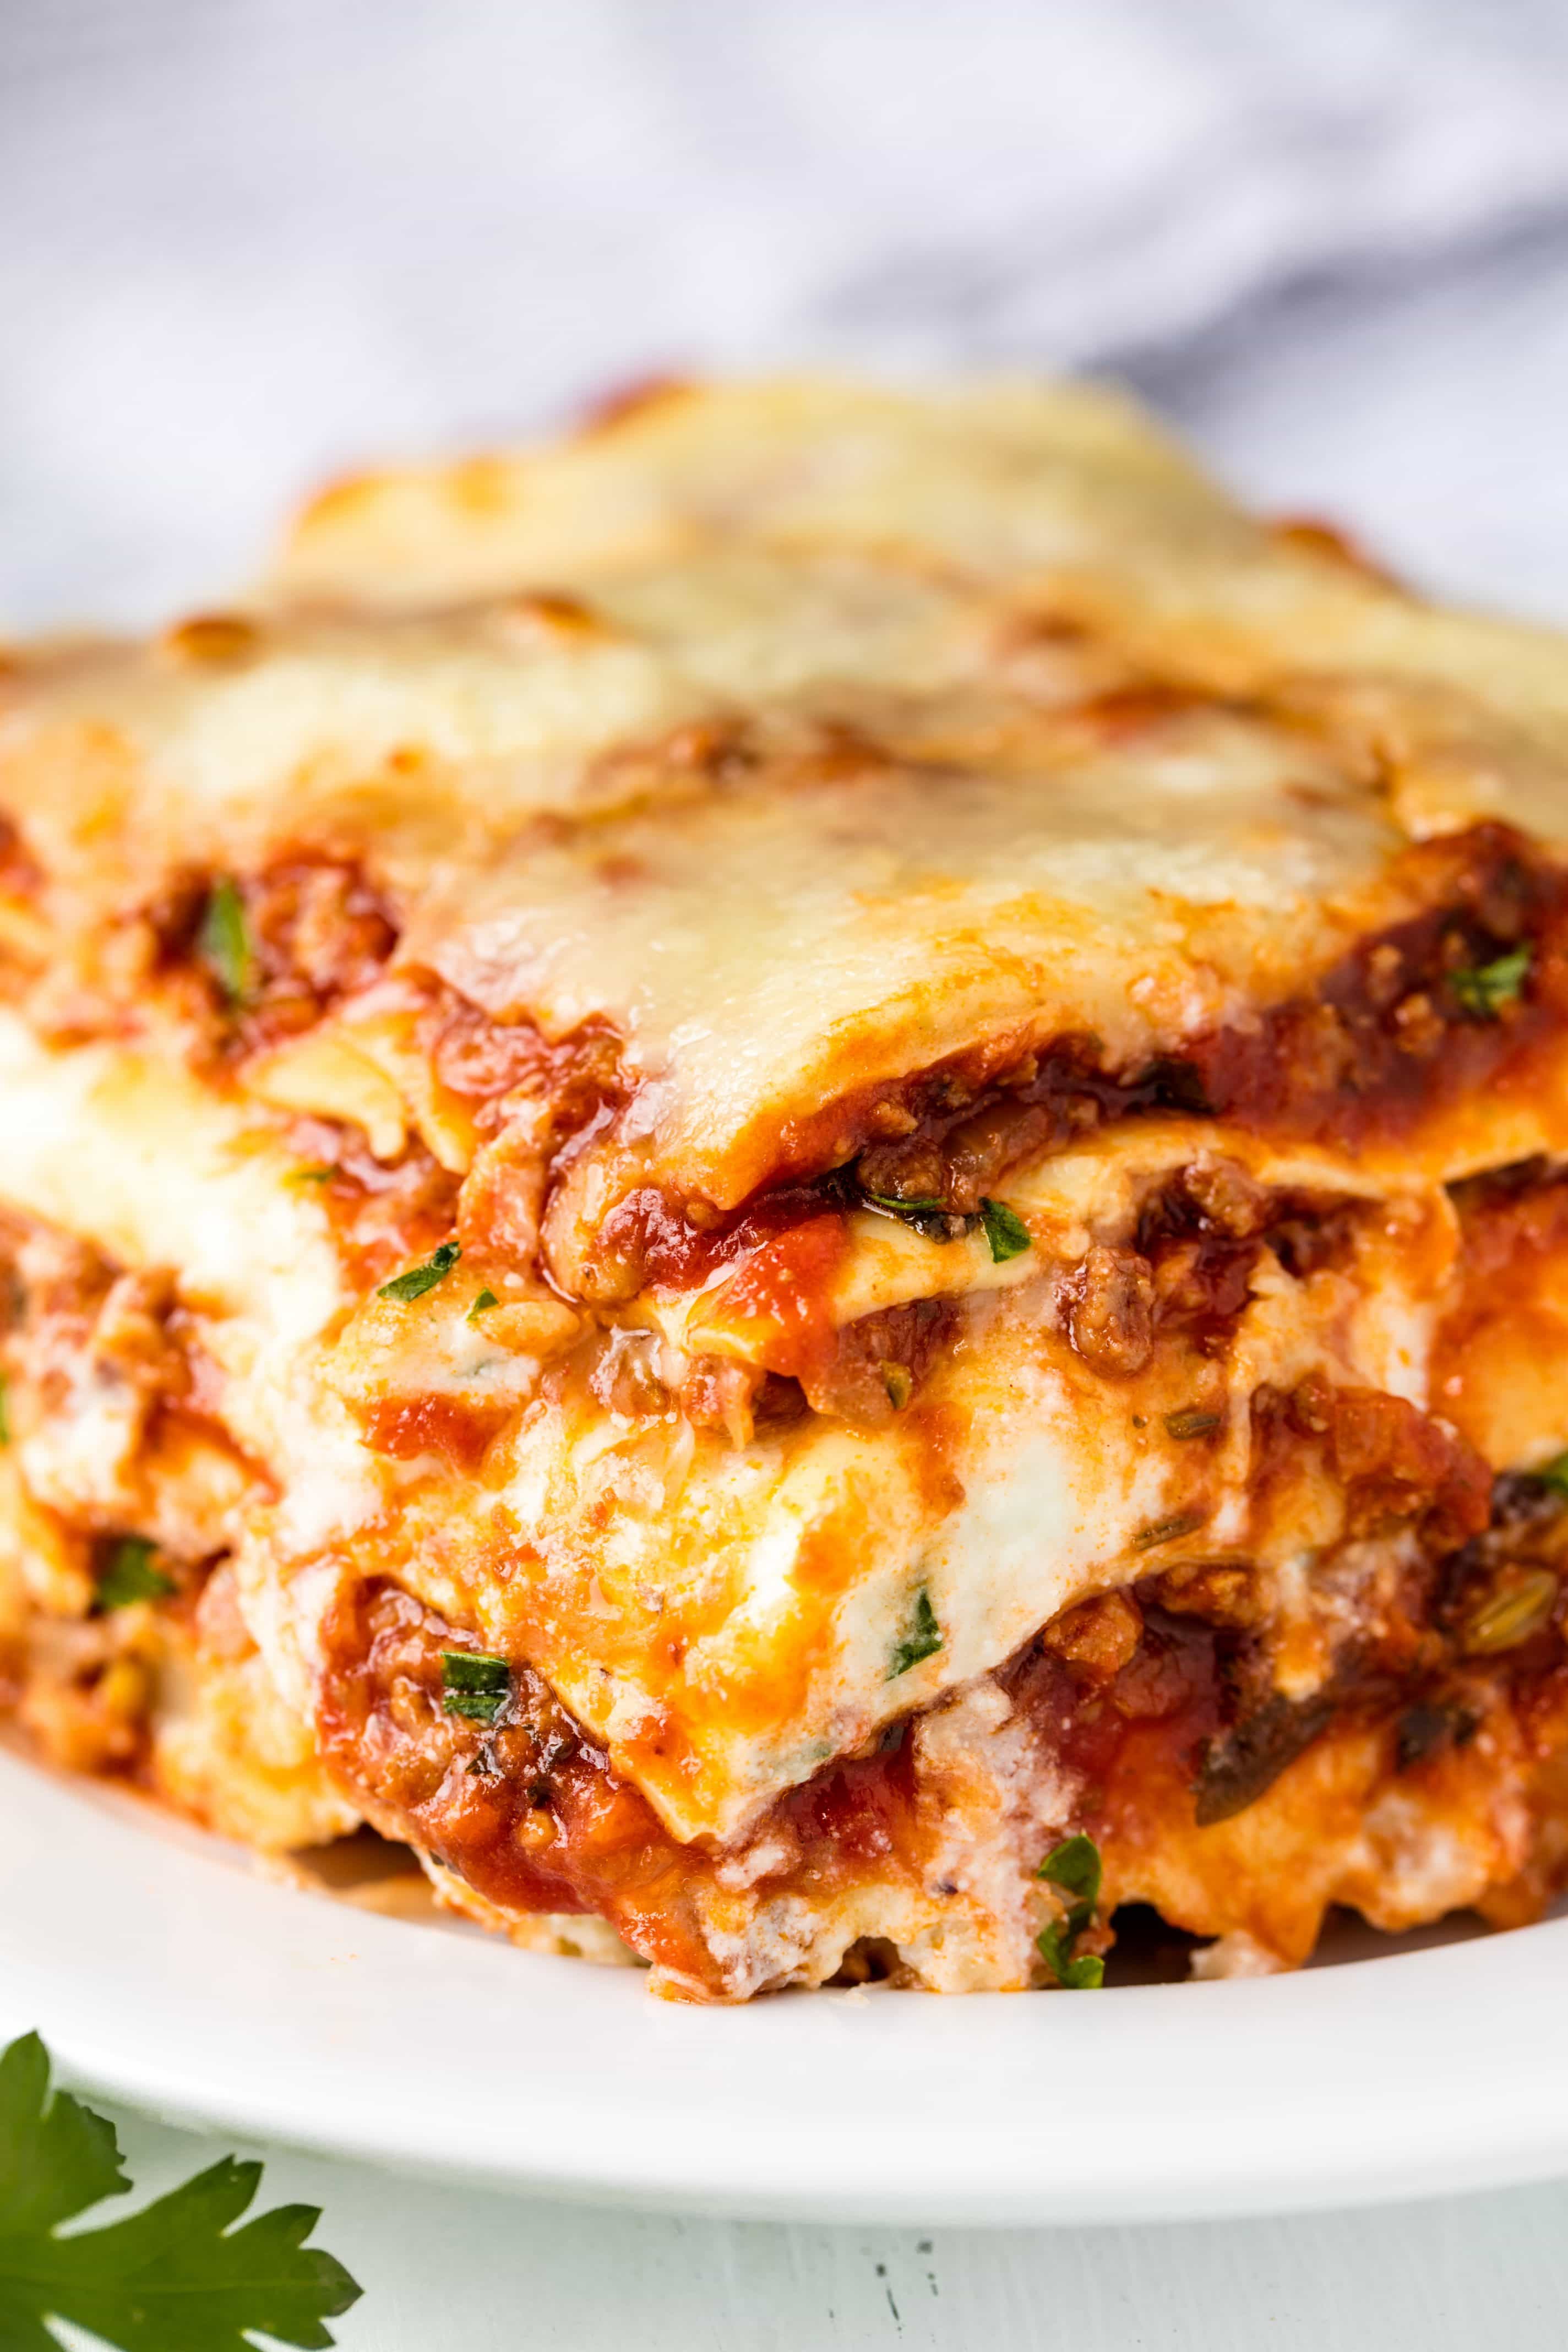 A slice of the Most Amazing Lasagna on a plate